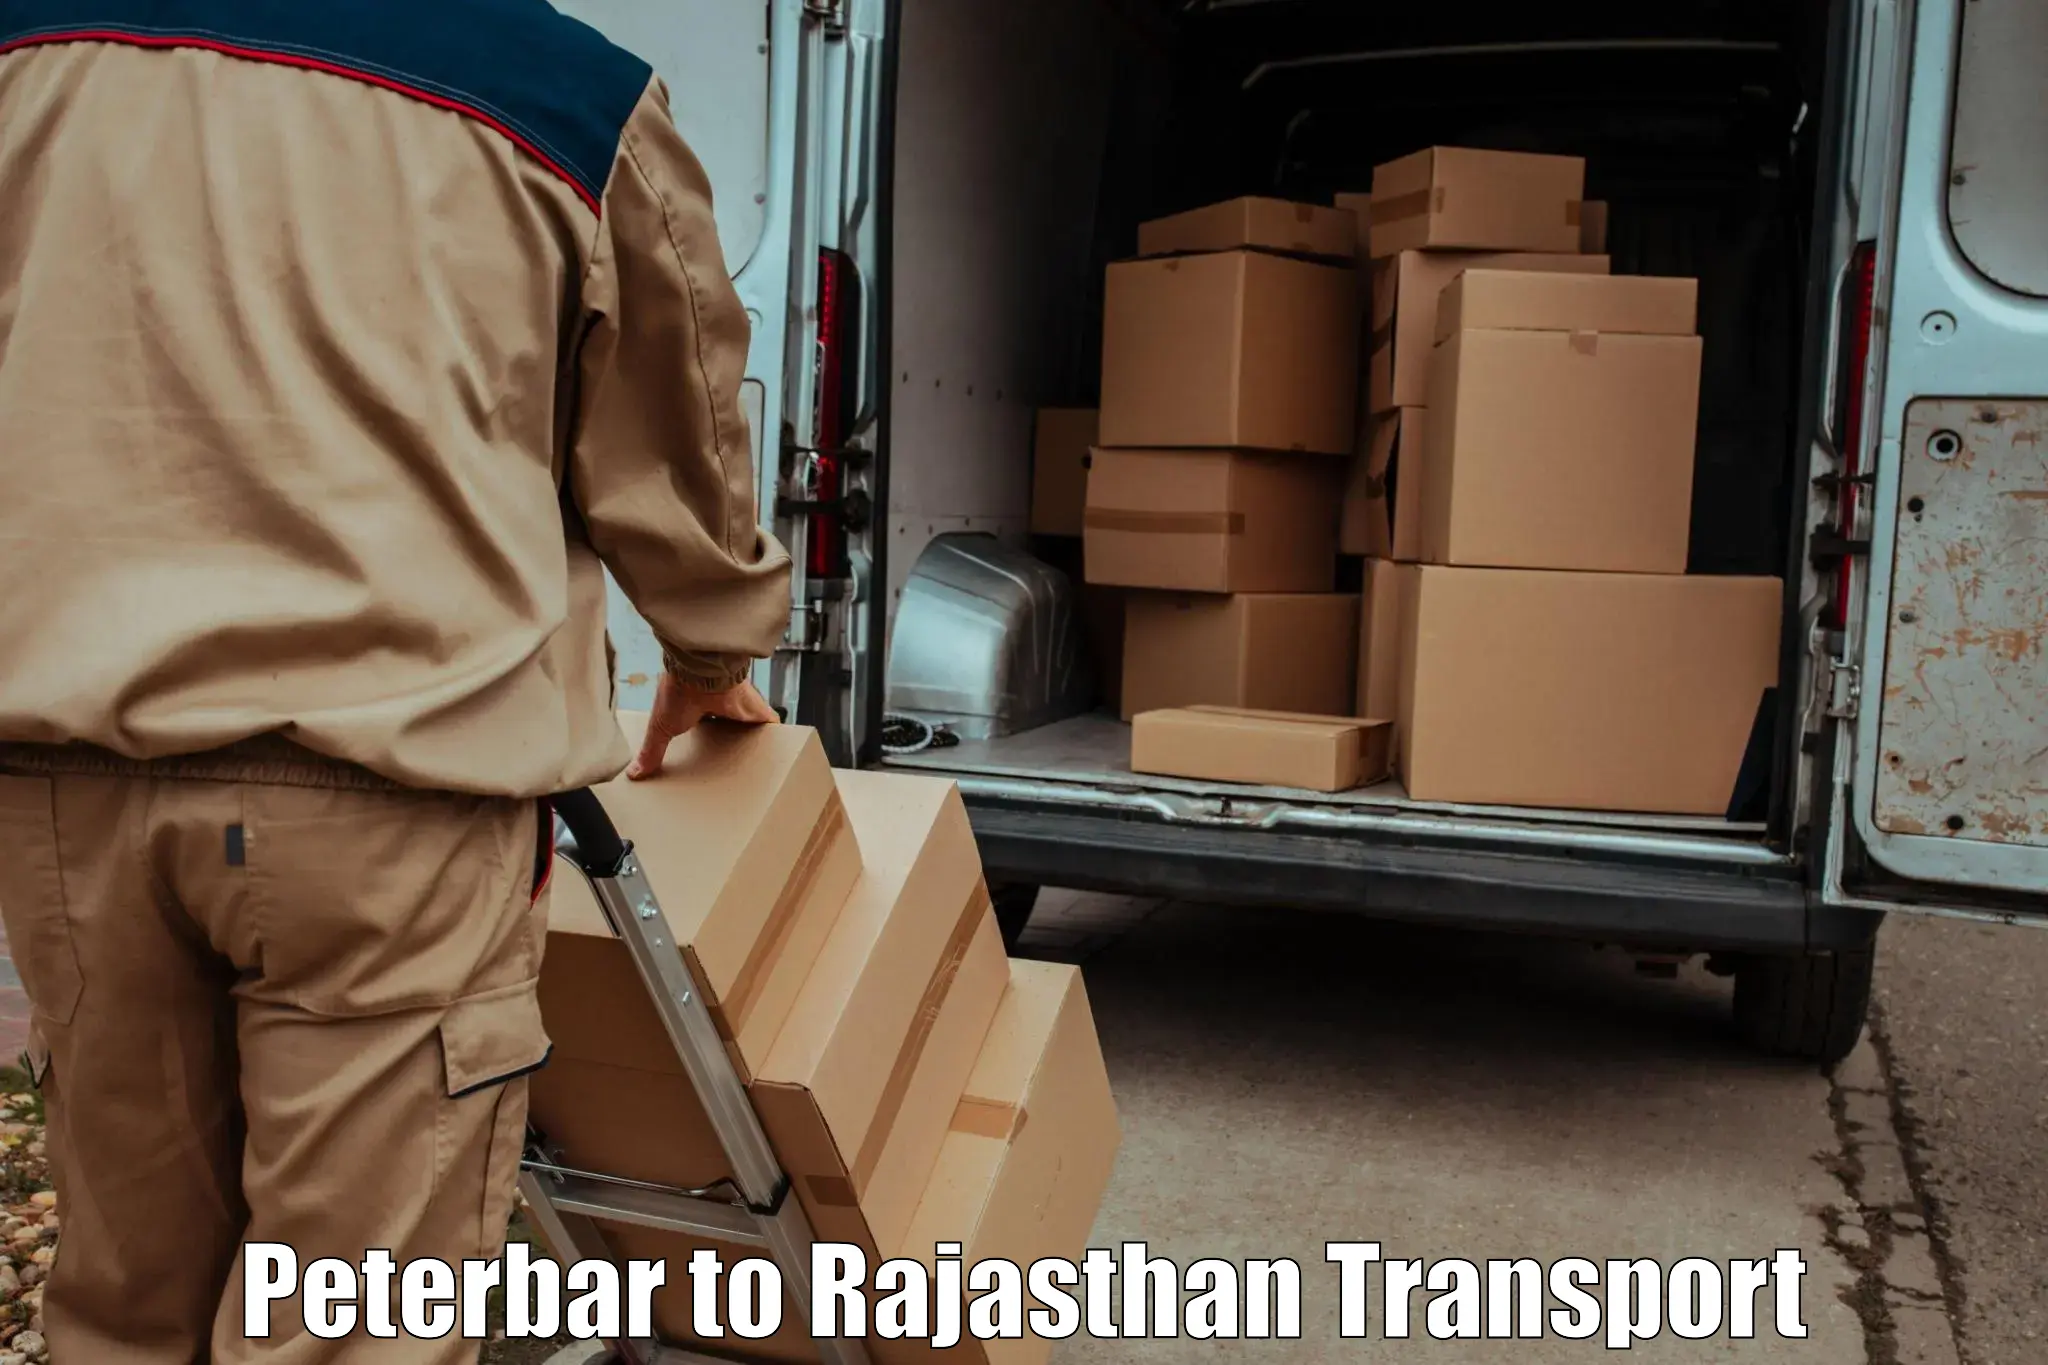 Domestic goods transportation services Peterbar to Mathania